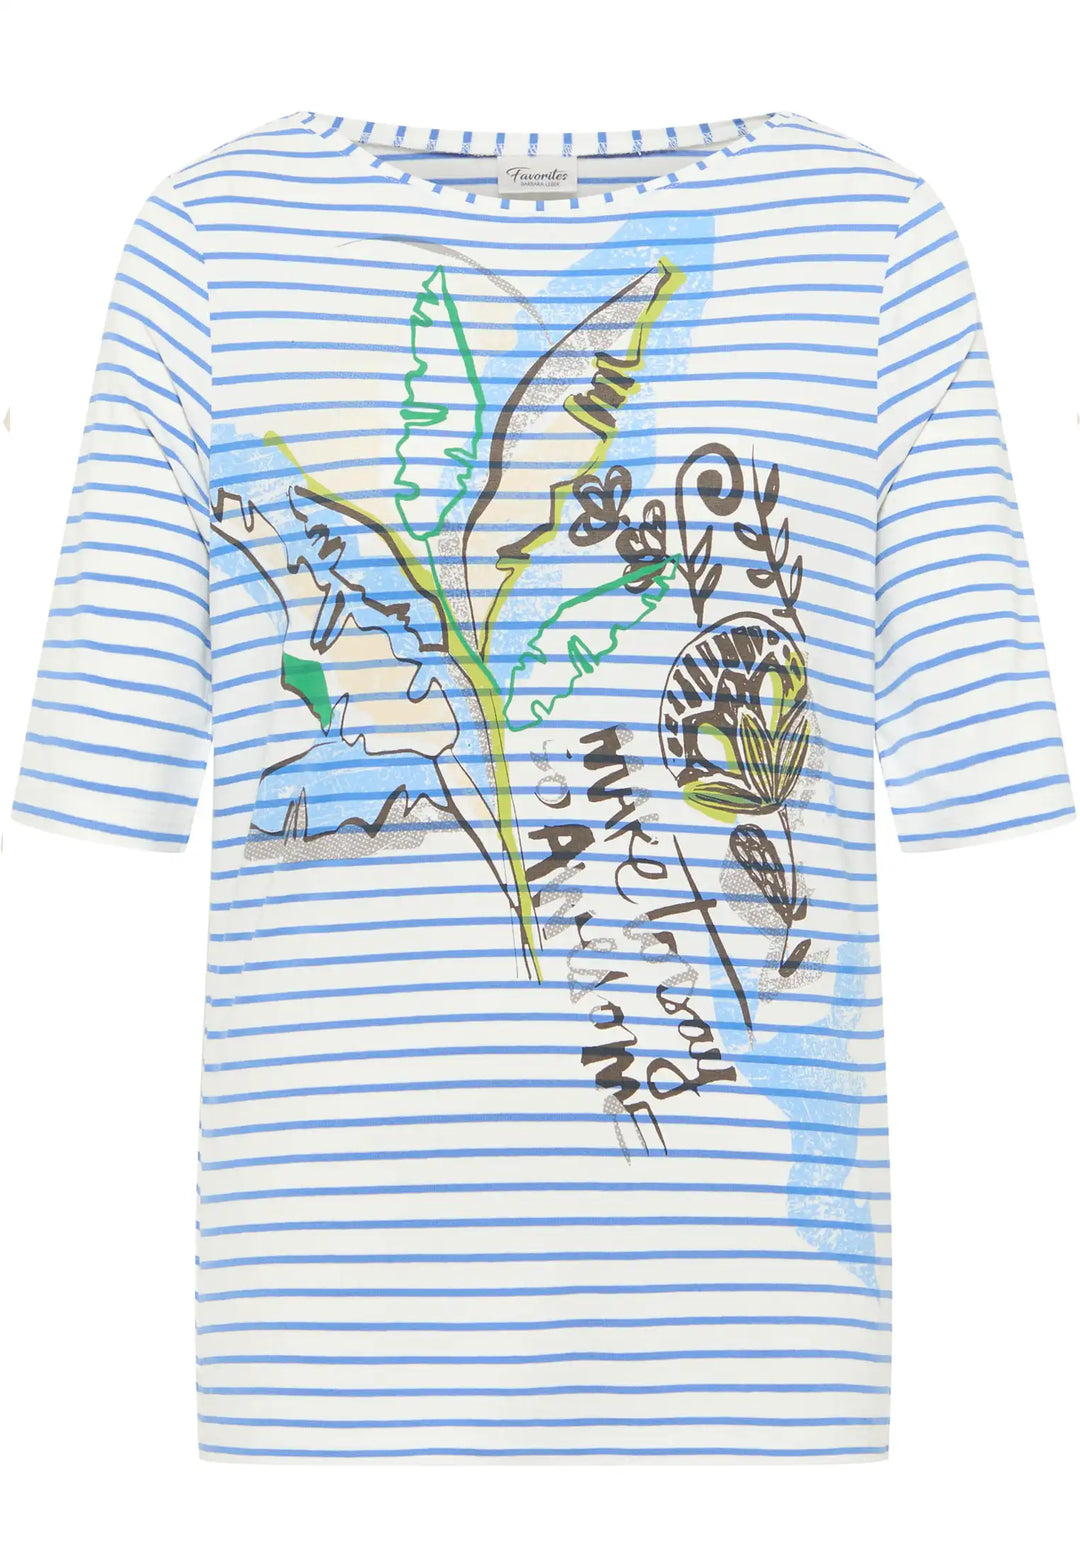 Front view of a blue striped top with green leafy and abstract print, round neck, and short sleeves, style 55250042-730